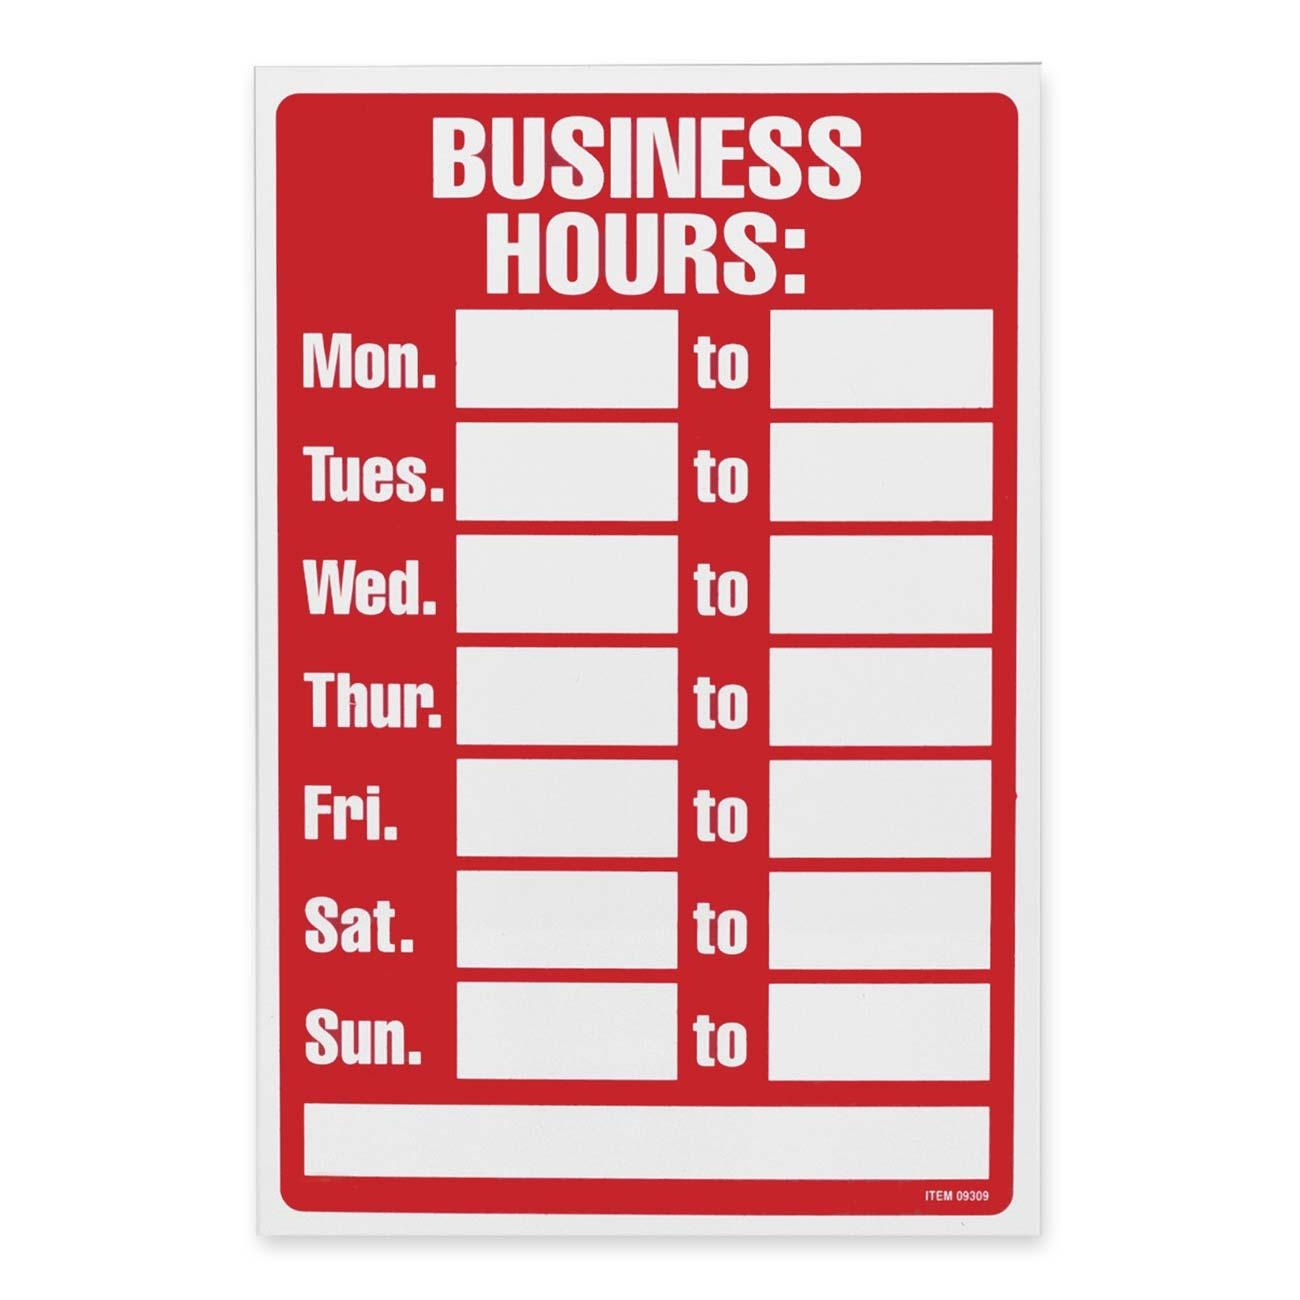 download-35-38-hour-operation-business-hours-template-png-cdr